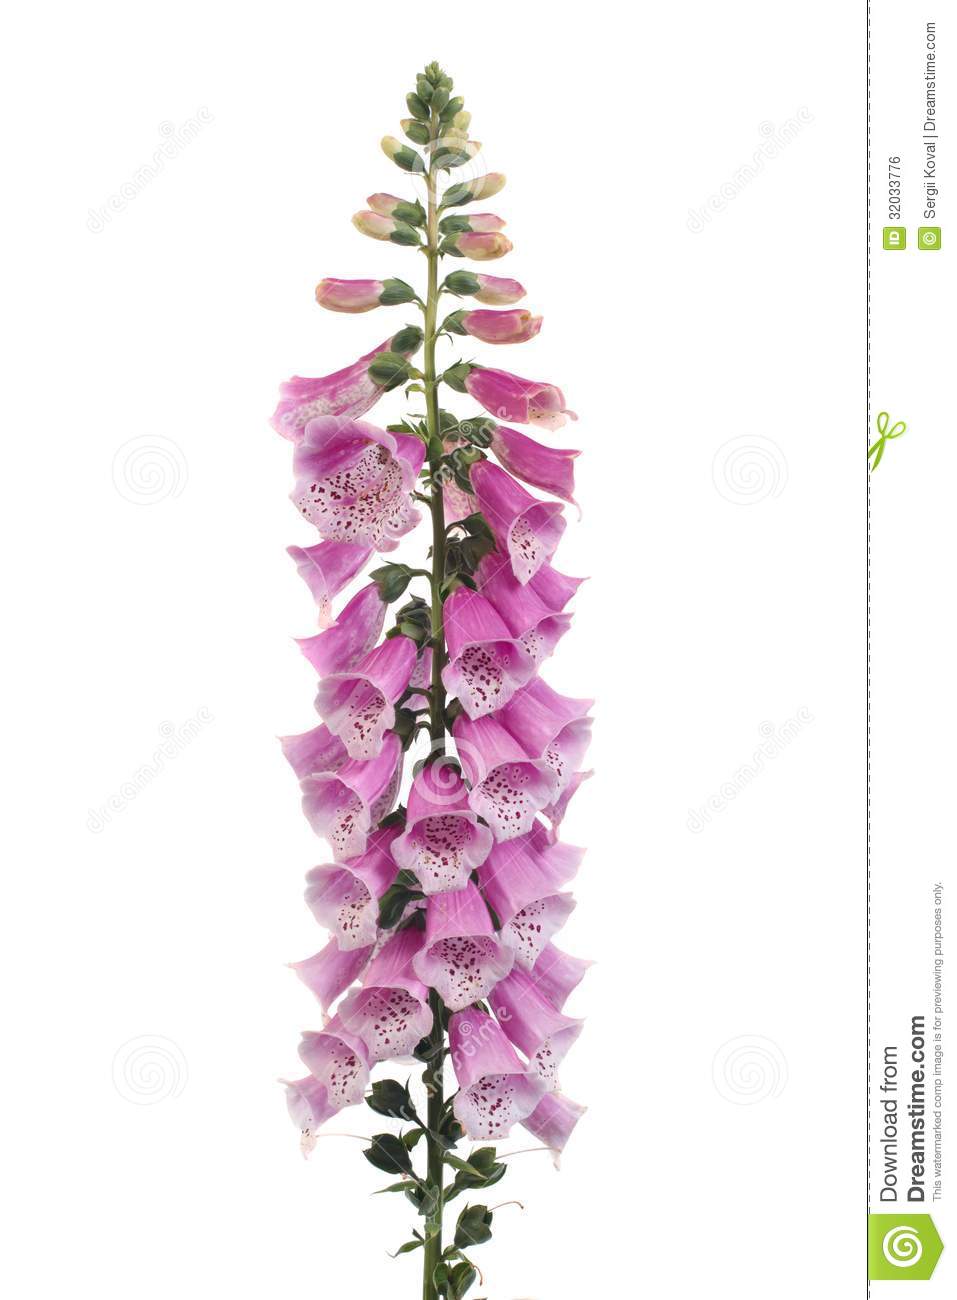 Purple Foxglove Flowers Isolated On White Royalty Free Stock Image.